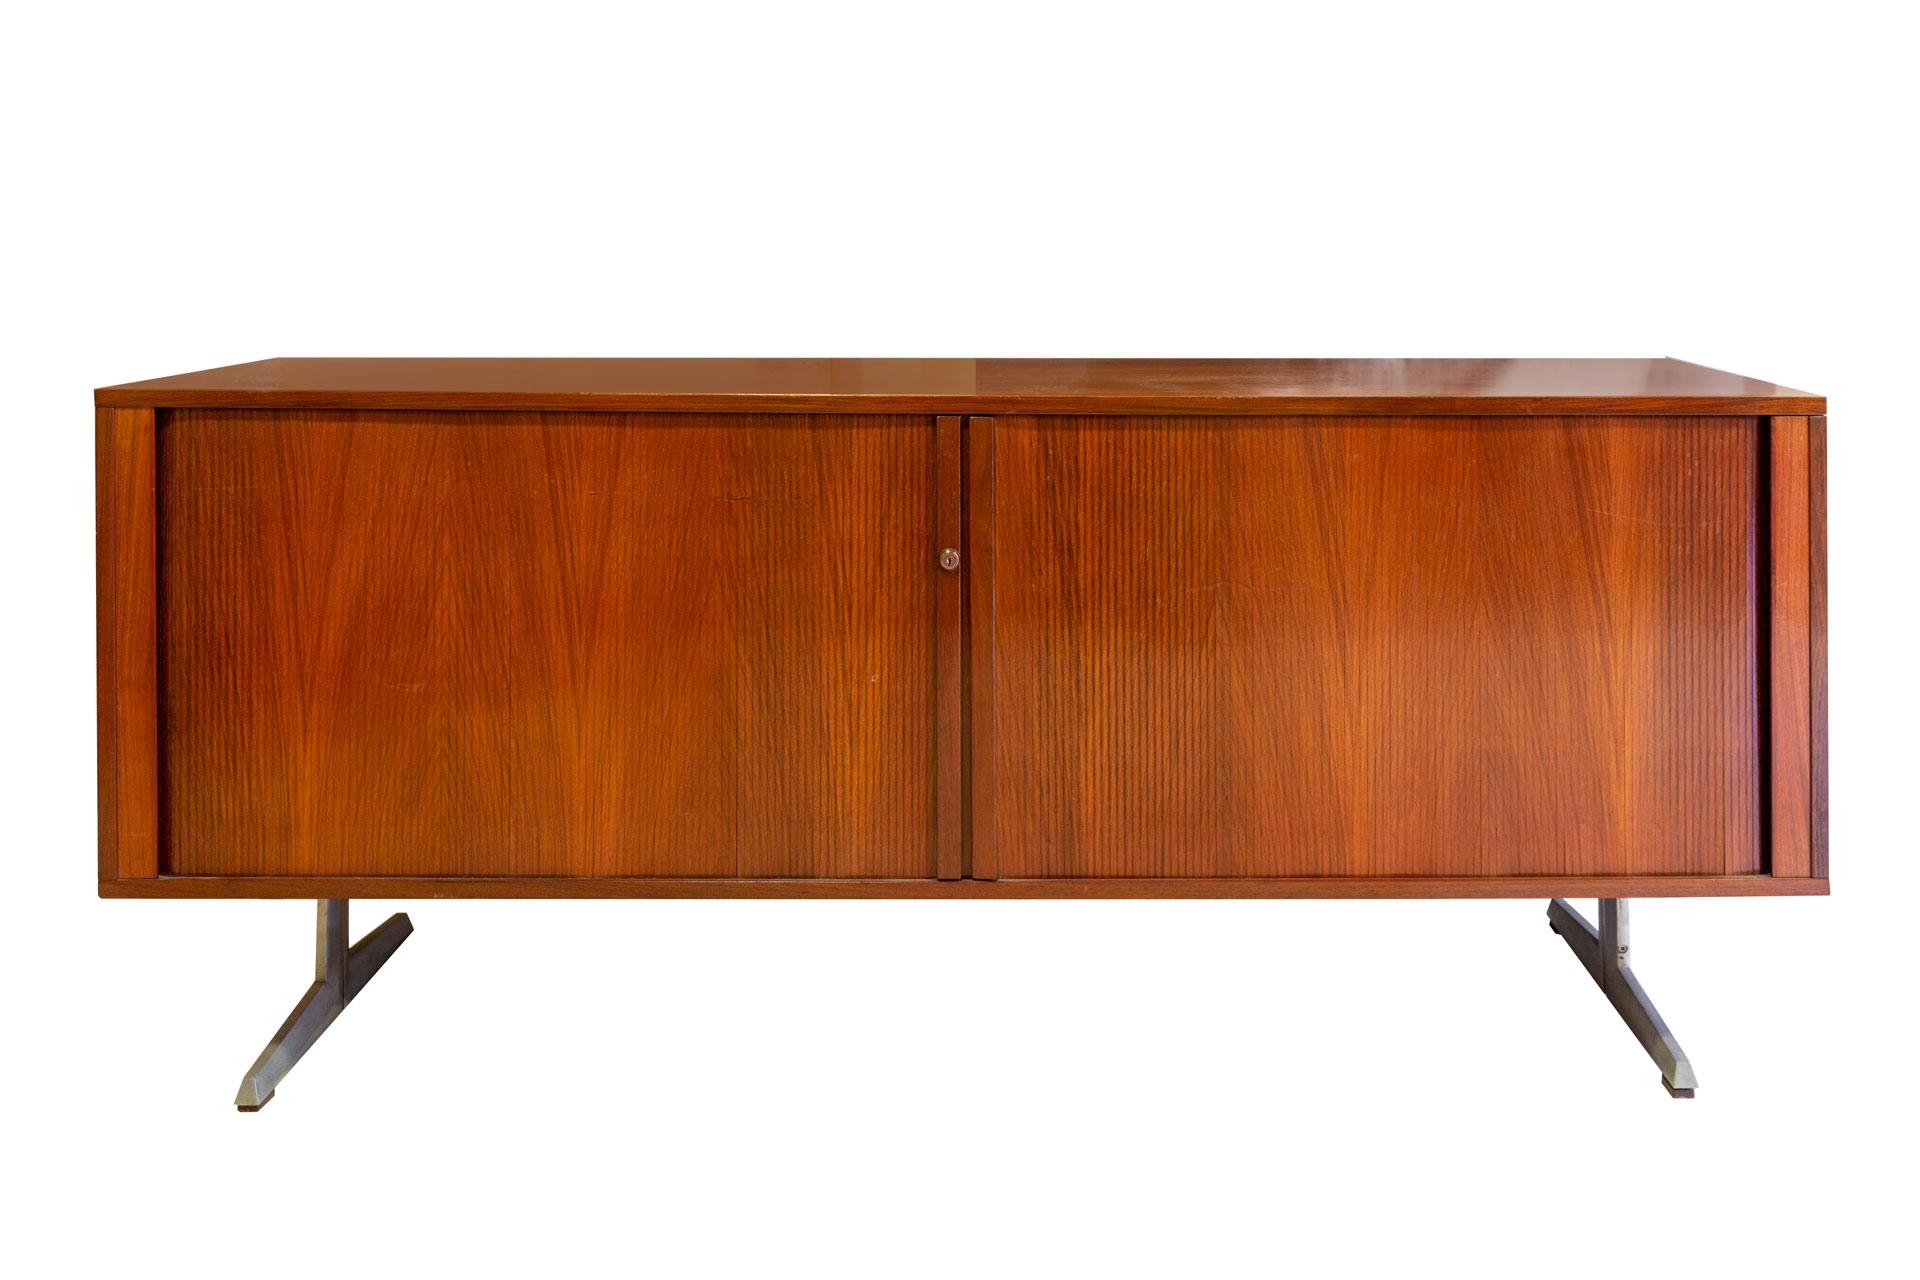 Sideboard Mid-Century Modern sliding-doors. Danish by Marius Bryialsen from Nipu 1960s
Superb quality. The furniture is of excellent quality both in the line and in choise of materials. The grissinate doors are sliding. The sideboard is elegant and